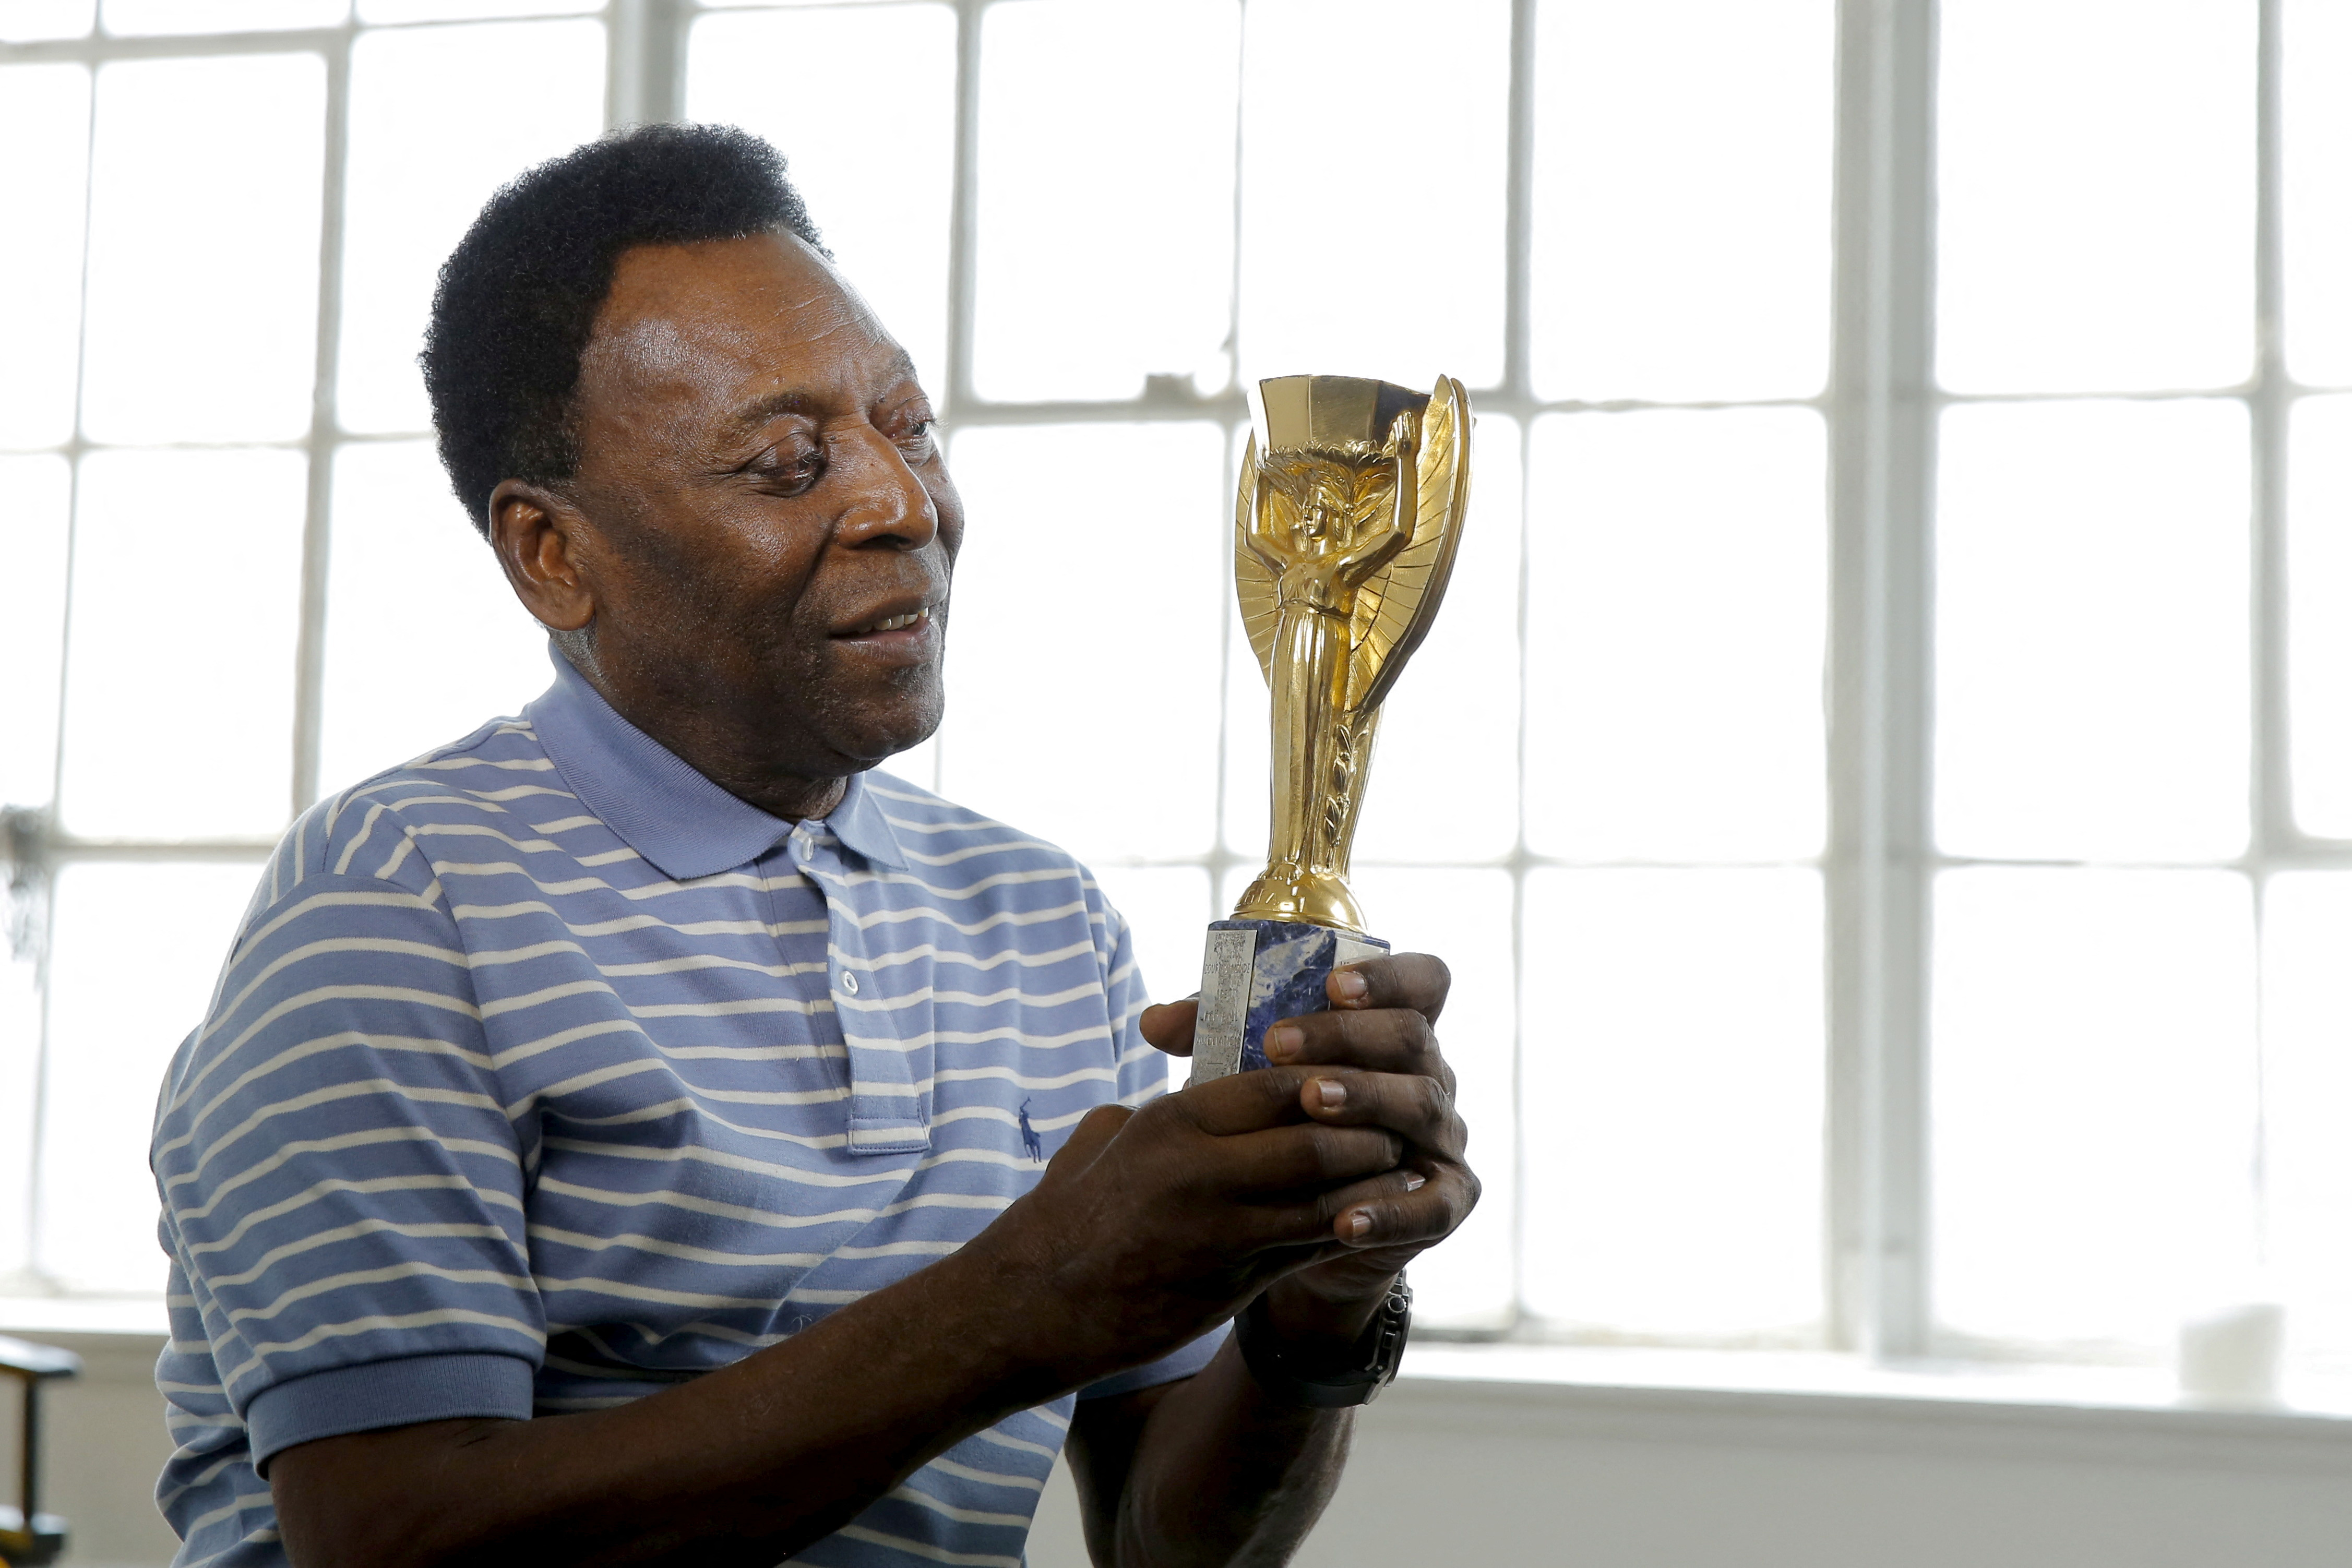 Legendary Brazilian soccer player Pele poses for a portrait with his 1958 World Cup trophy during an interview in New York